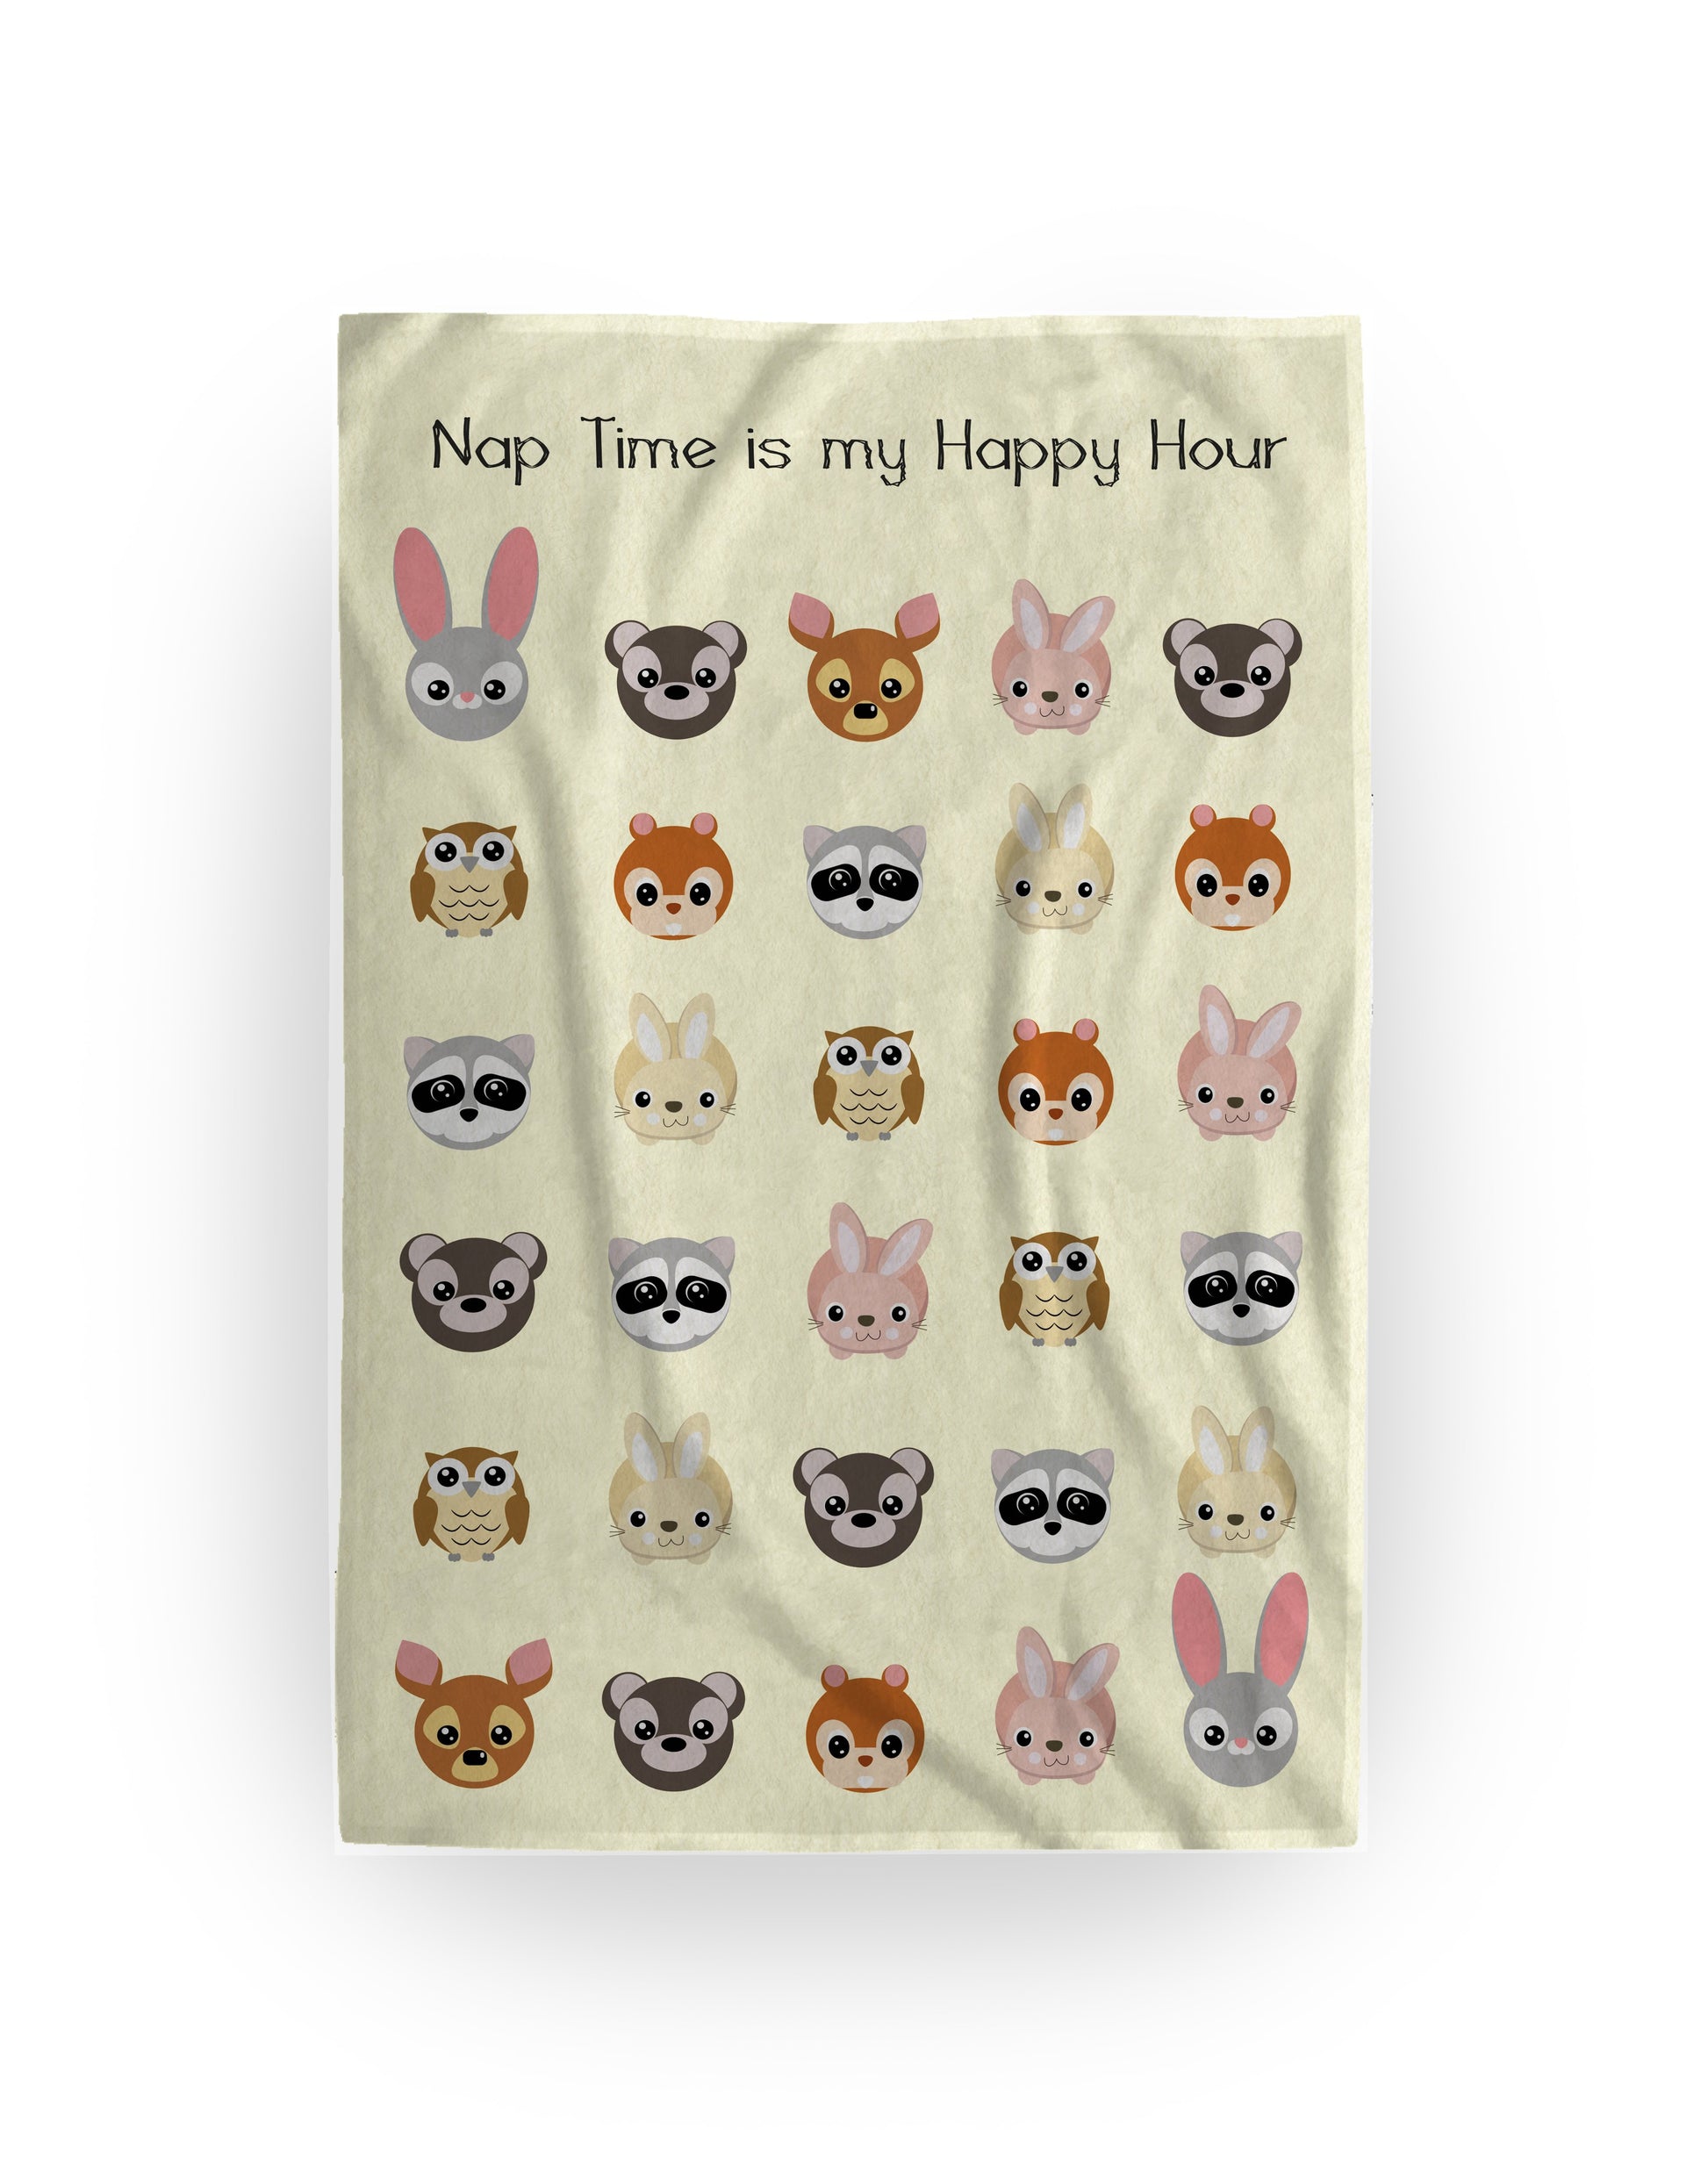 personalised blanket for kids, cute animals. add personalised text.